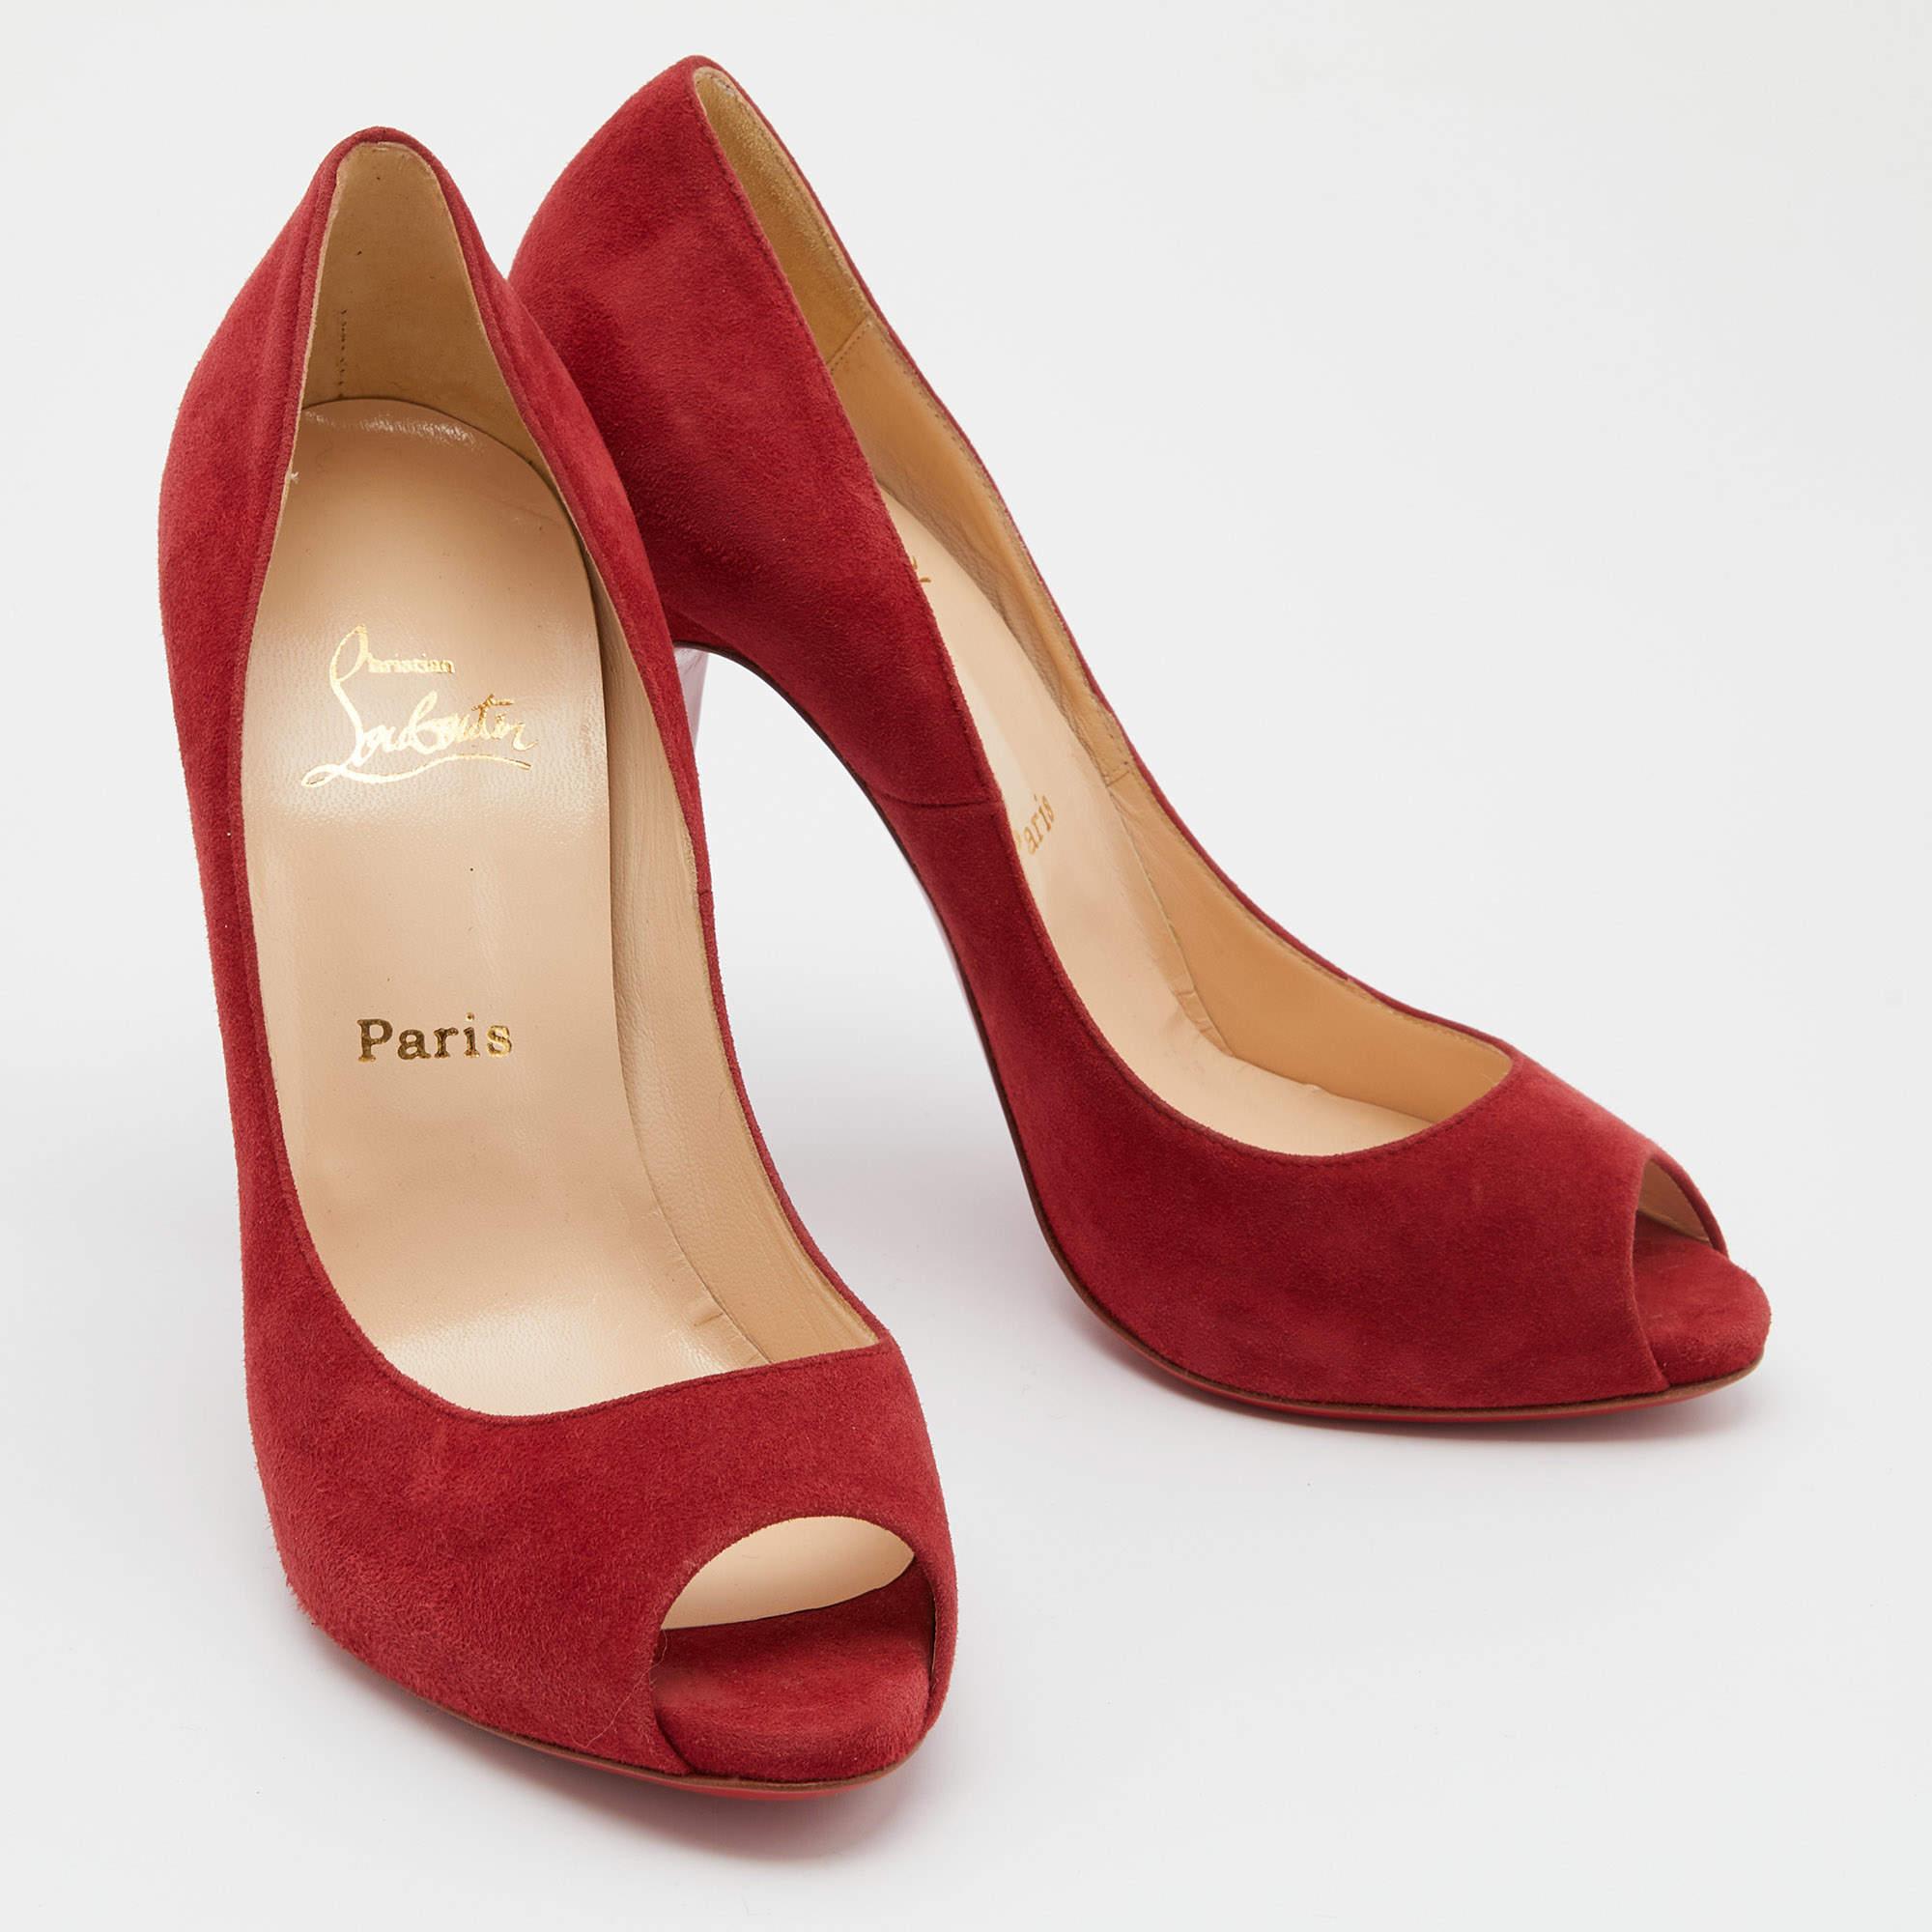 Christian Louboutin Red Suede Hyper Prive Peep Toe Platform Pumps Size 38.5 For Sale 1